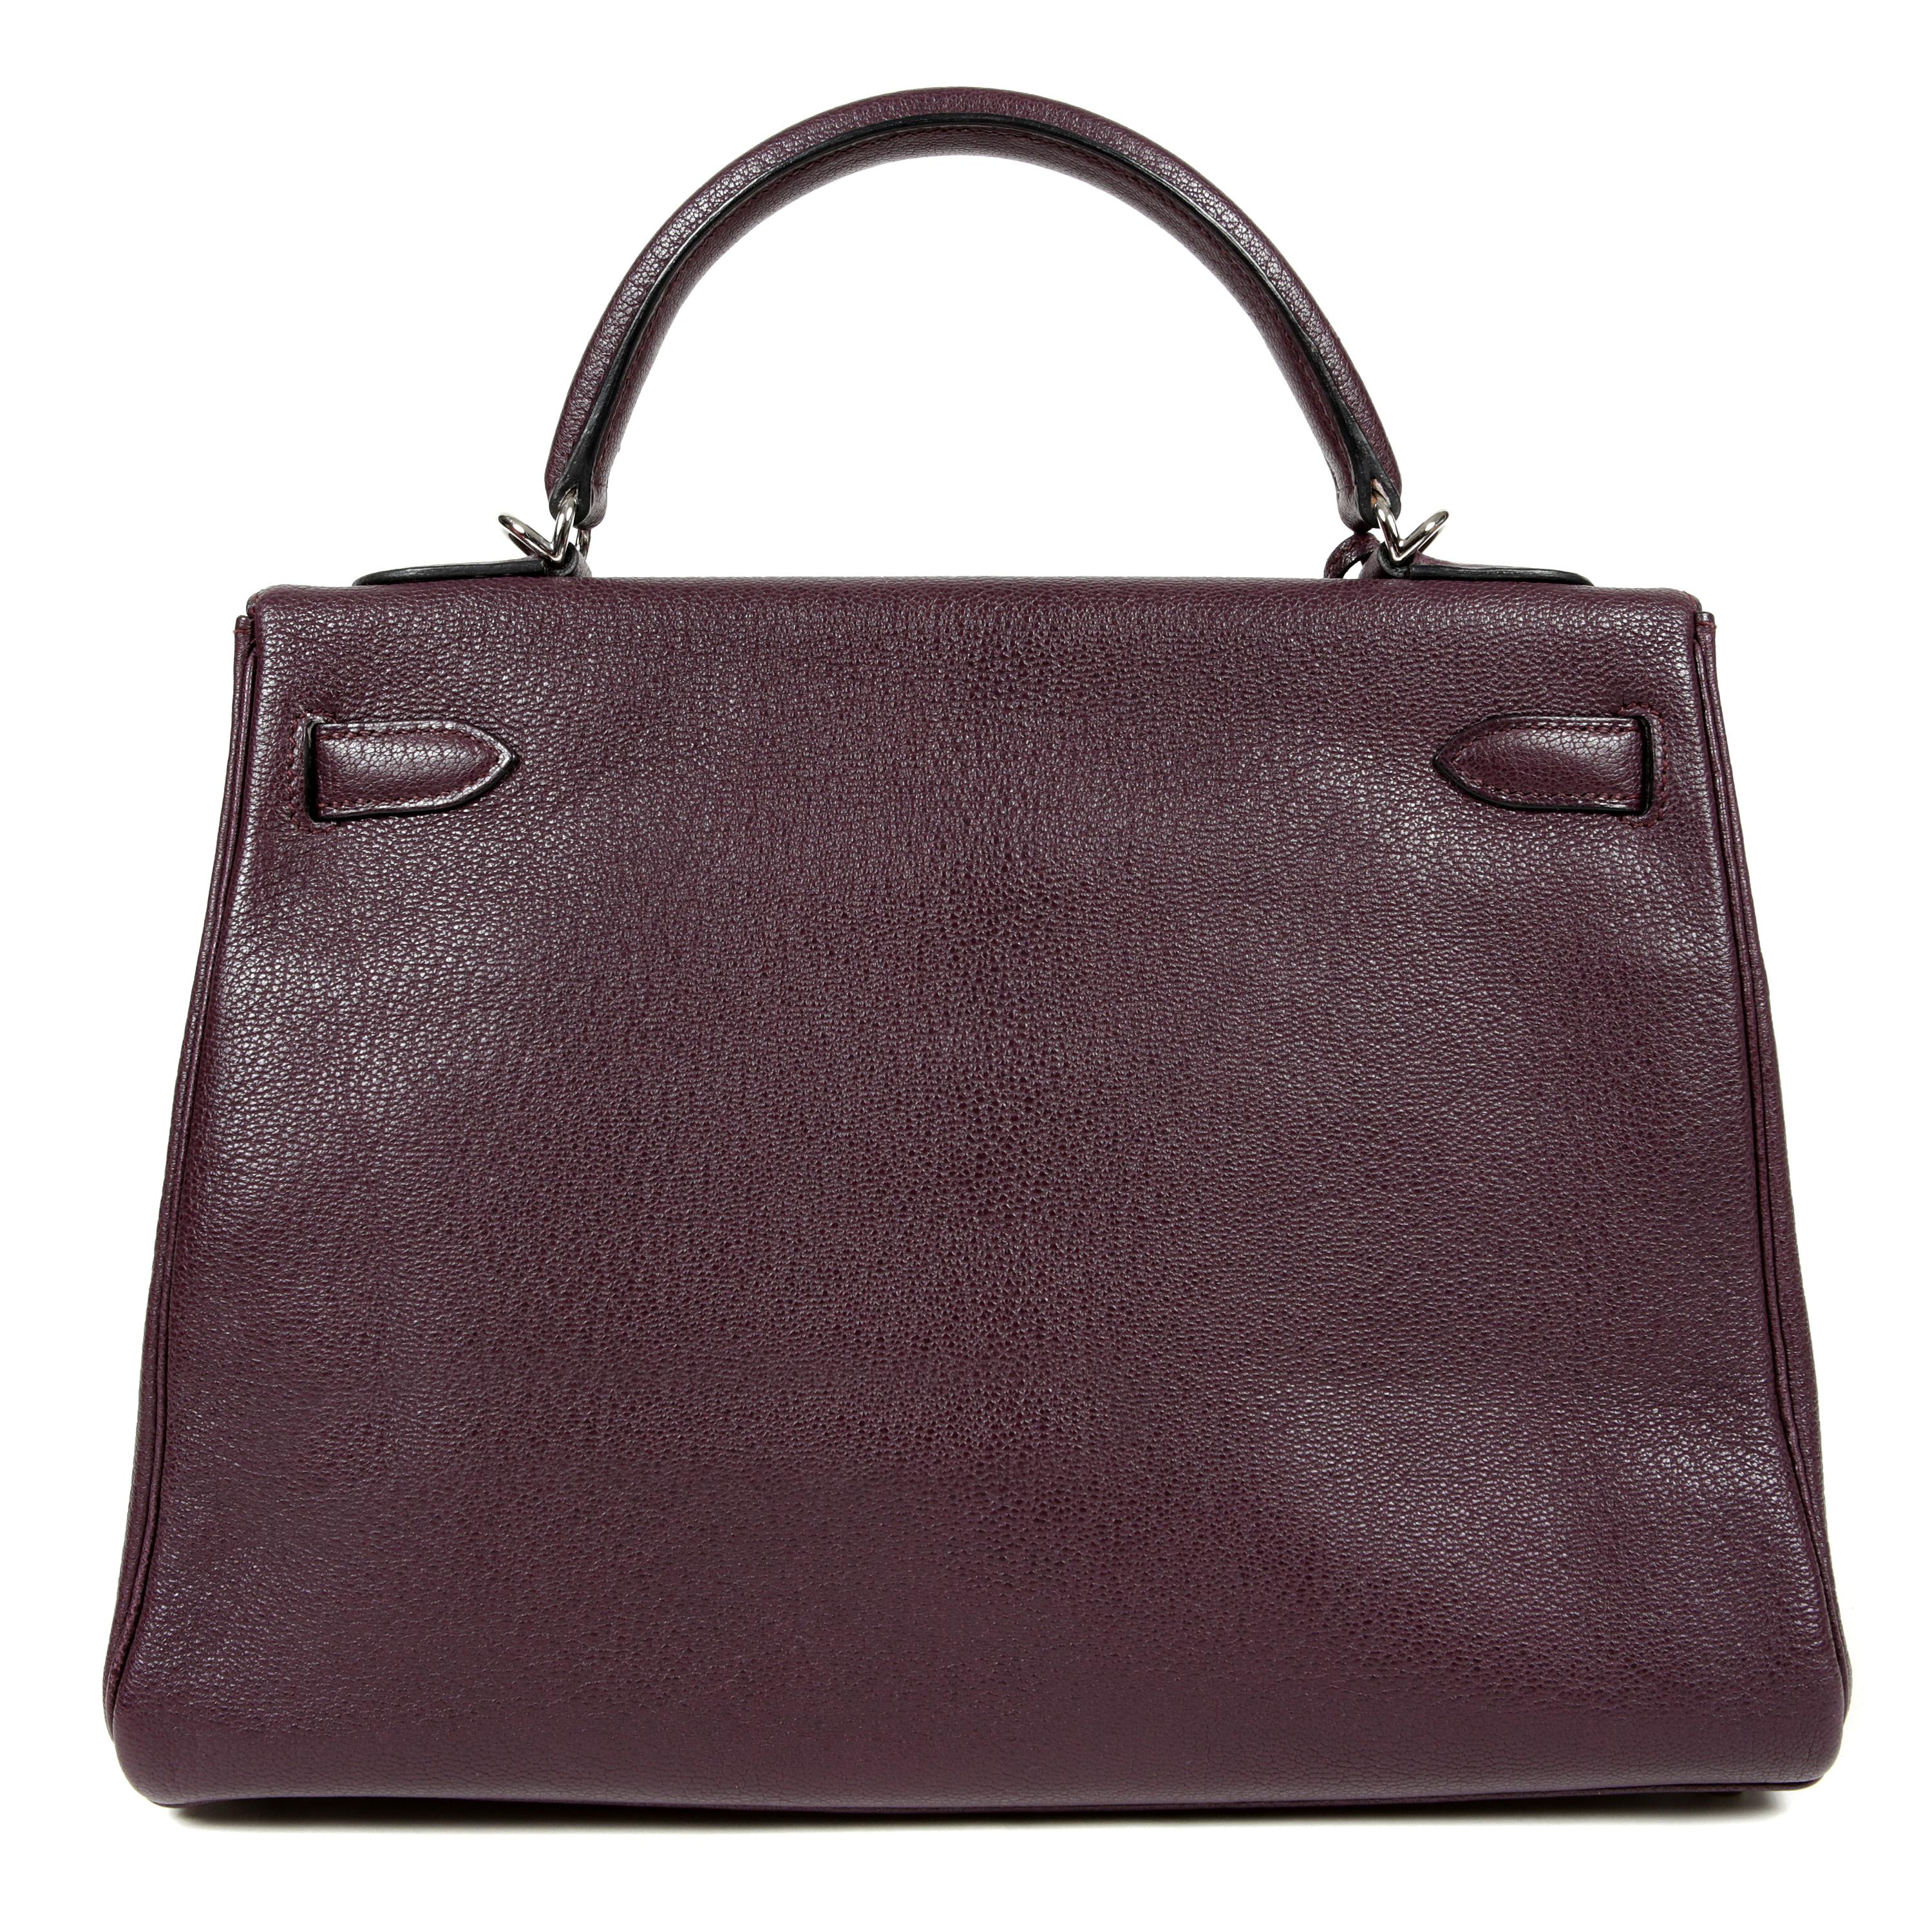 This authentic Hermès Plum Chevre Leather 32 cm Kelly is in pristine condition. Hermès bags are considered the ultimate in luxury worldwide. Each piece is handcrafted with waitlists that can exceed a year or more. The ladylike Kelly is classic and